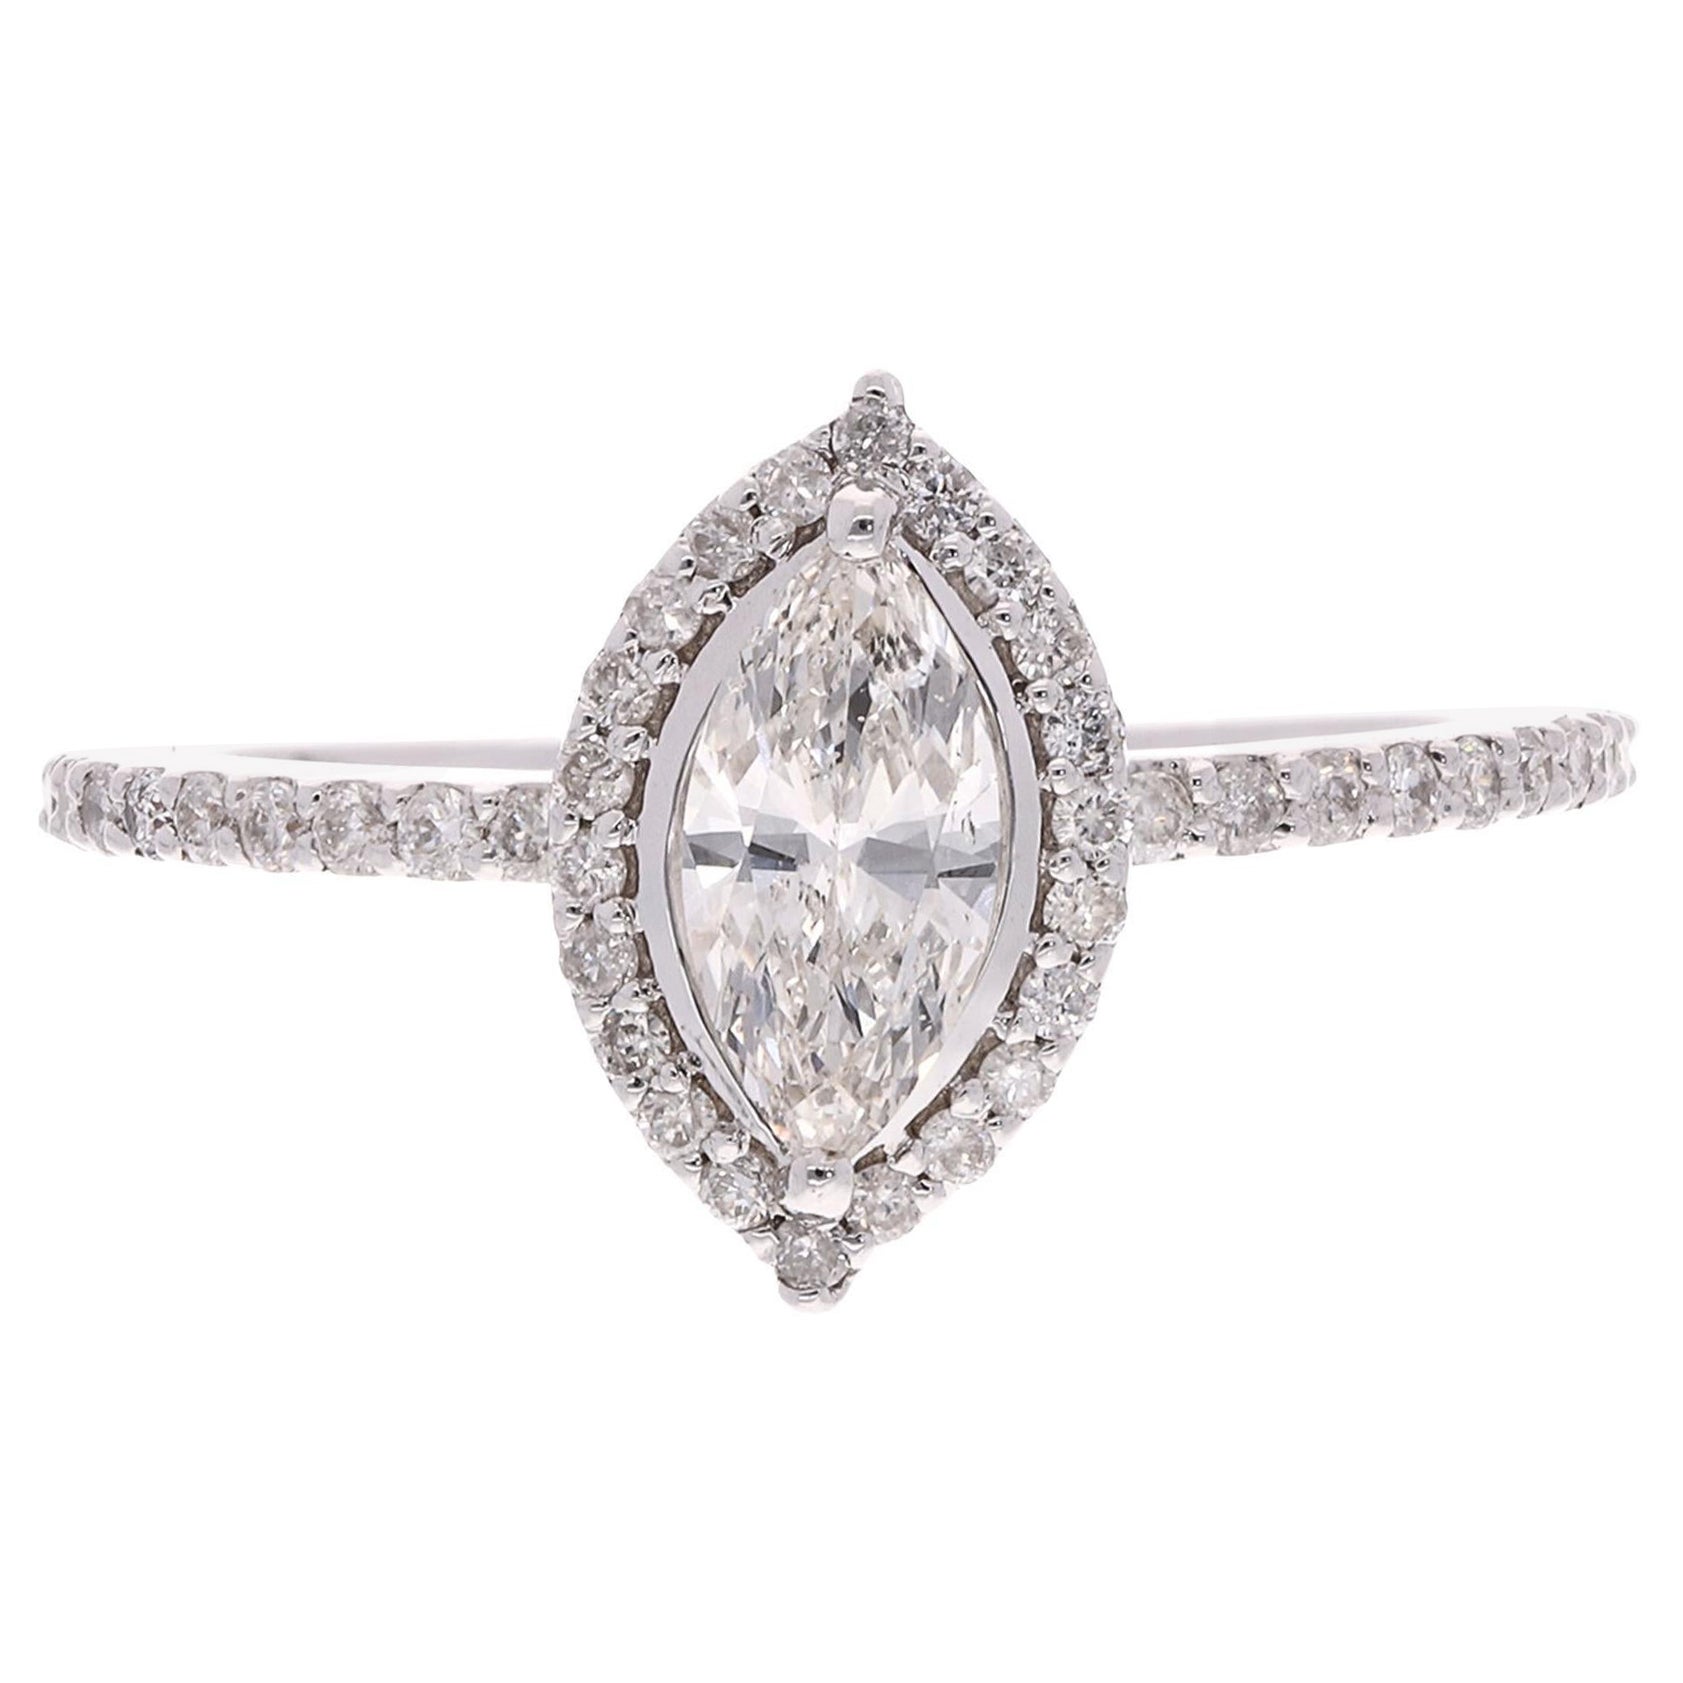 0.86 Carat Solitaire Marquise Cut Diamond Engagement Ring in 18 Karat White Gold